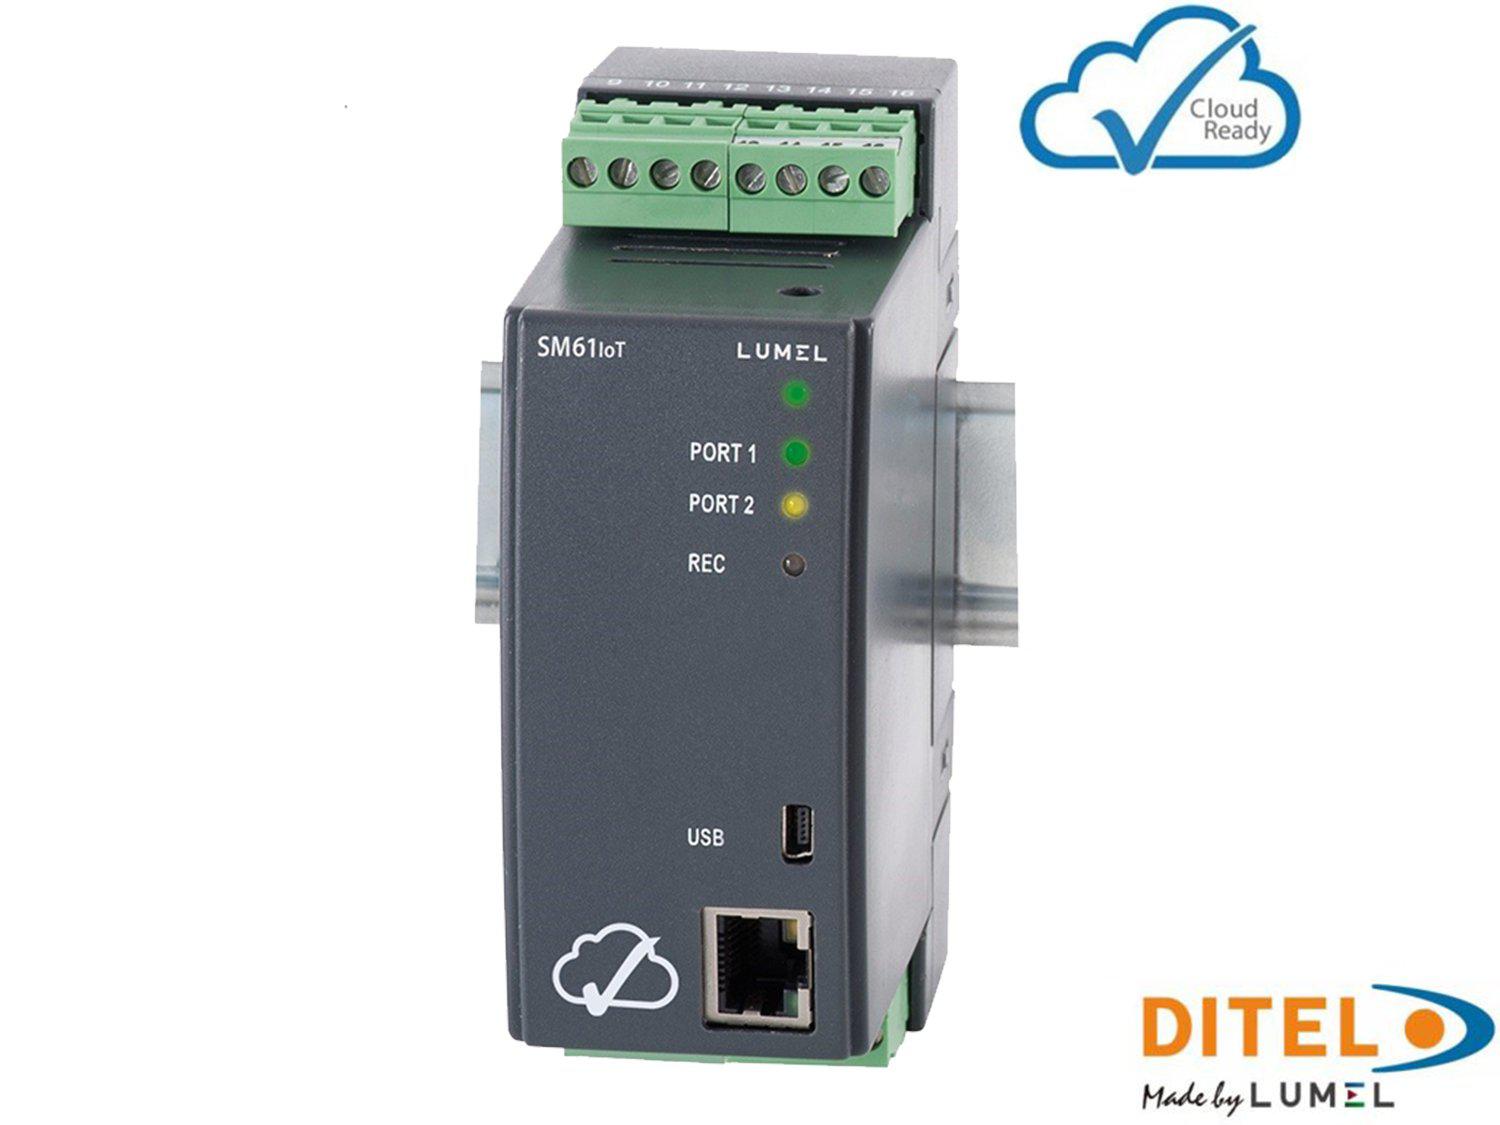 SM61IoT-11MQE0, Datalogger with Internal Web page, Universal 85-253VAC, 90-300VDC, 2 Relays, Modbus TCP/RTU,MQTT,HTTP/TCP/UDP/FTP/RS485/RS232/USB Comms-Communication Accessories-Lumel-Fastron Electronics Store